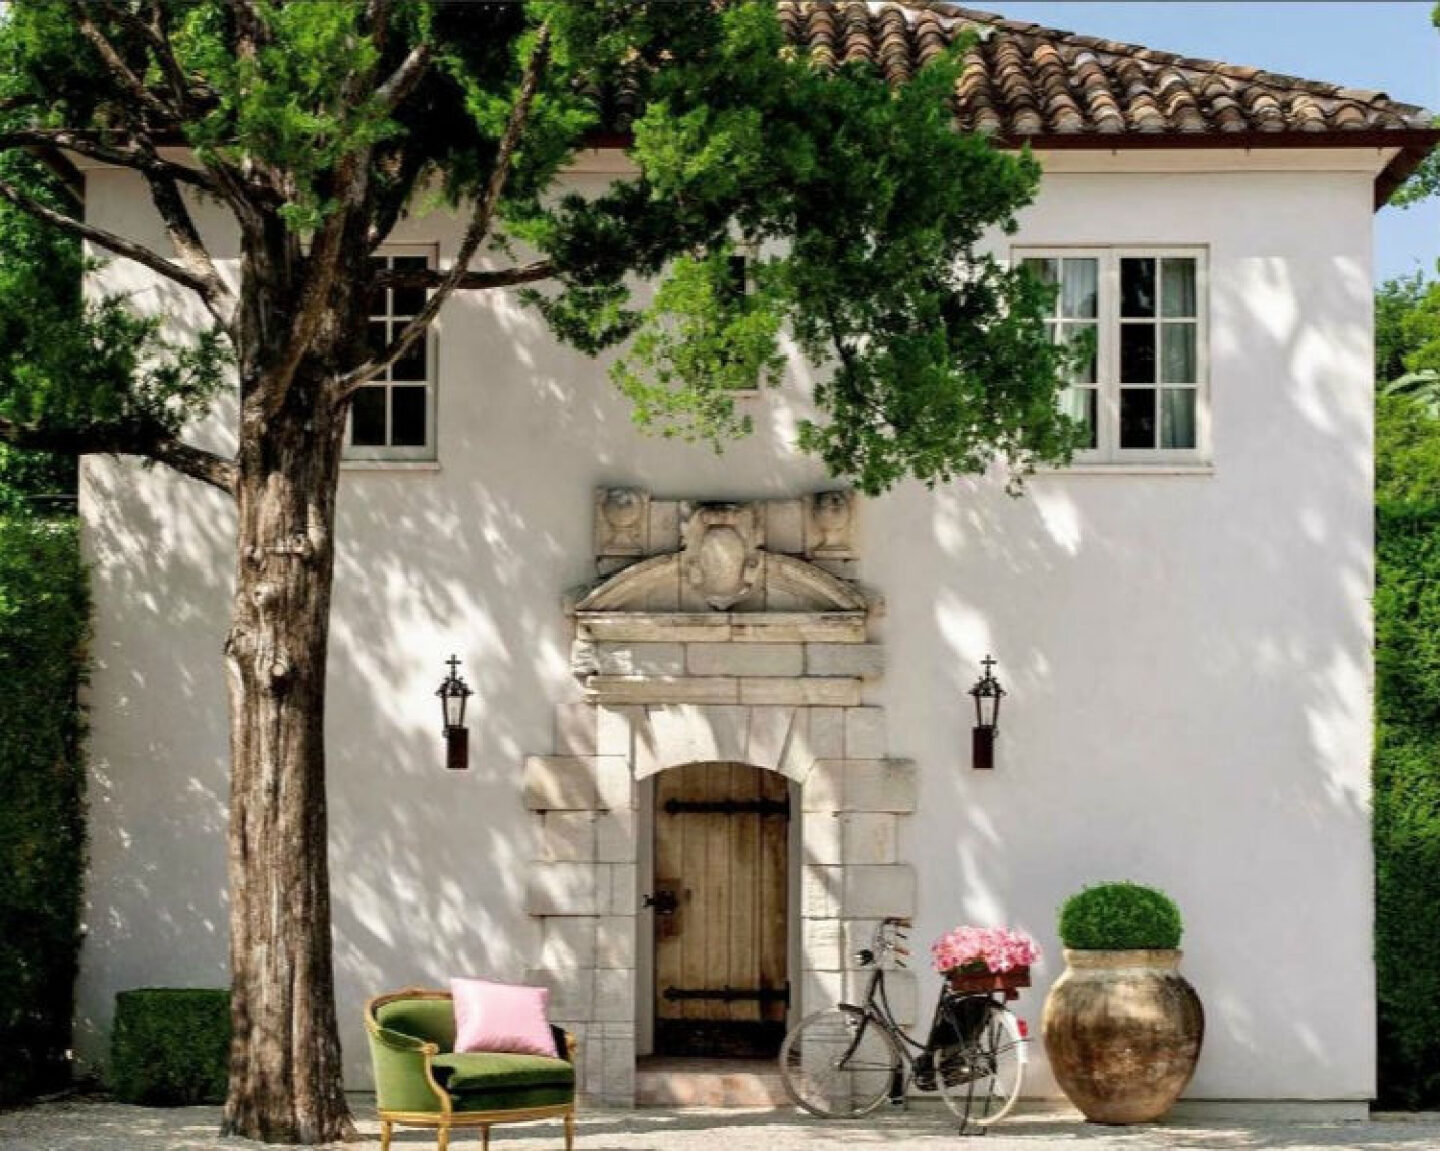 Gorgeous white stucco French farmhouse inspired house exterior with tile roof - Reagan Andre. #pamelapierce #reaganandre #frenchfarmhouse #houseexterior #housedesign #whitestucco